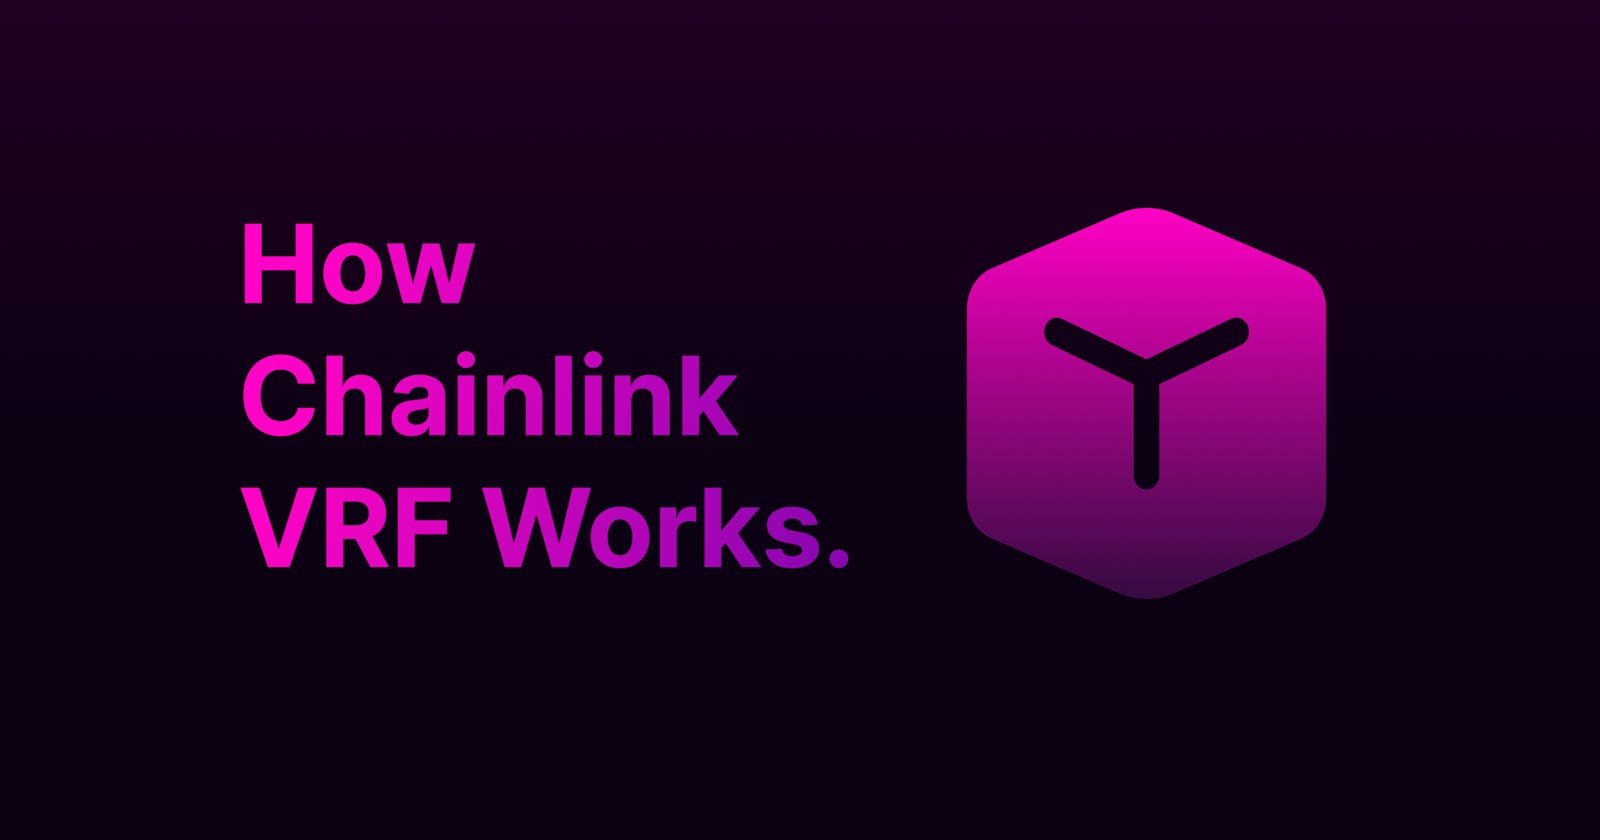 How Chainlink VRF Works